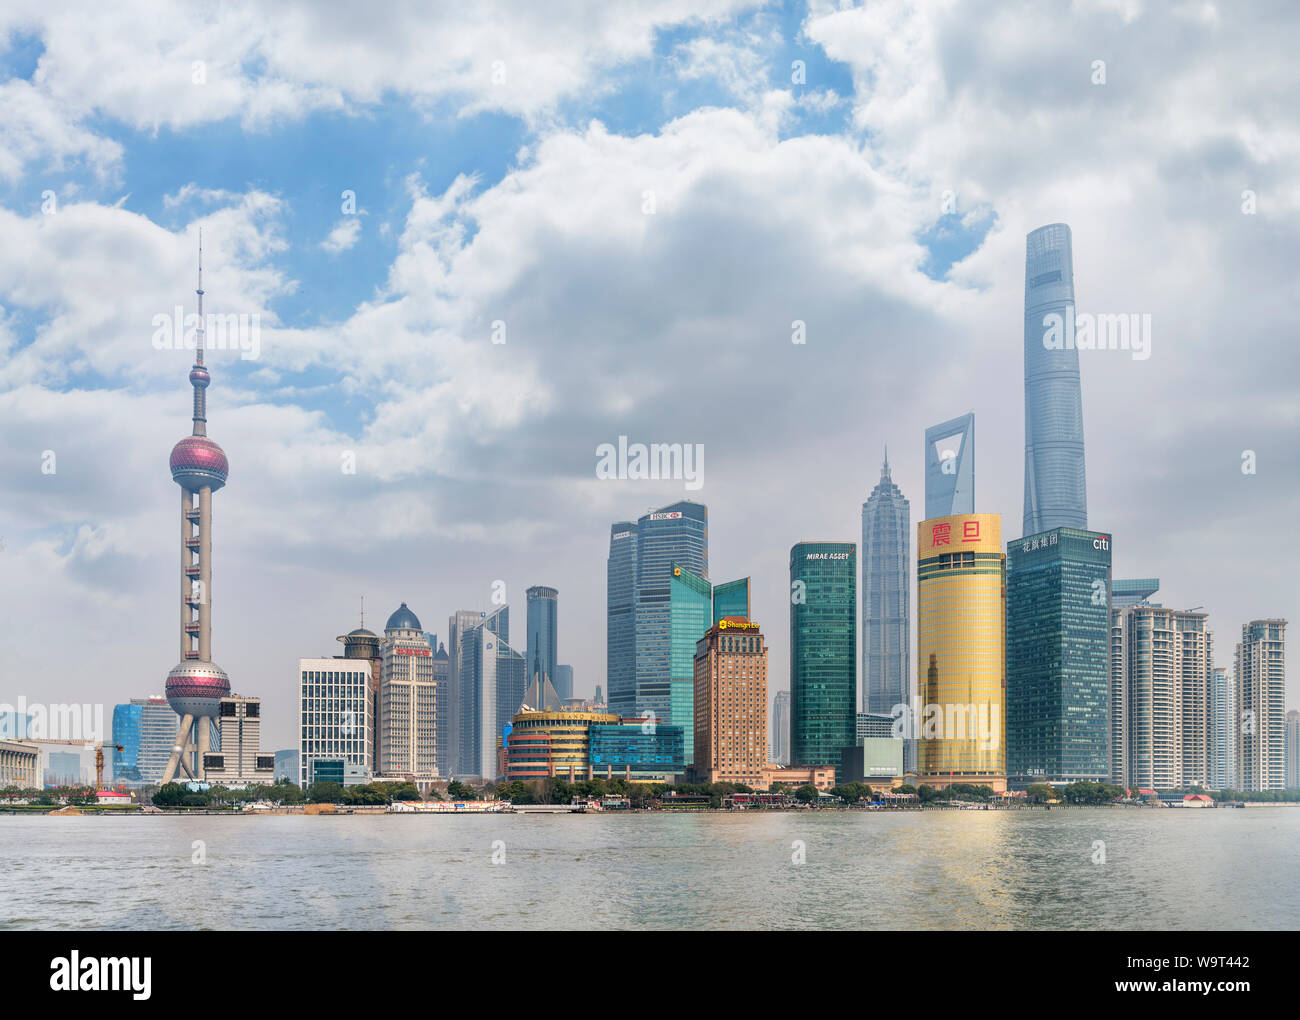 Business district of Pudong and Huangpu River viewed from The Bund with Oriental Pearl Tower to left and Shanghai Tower to right, Shanghai, China Stock Photo